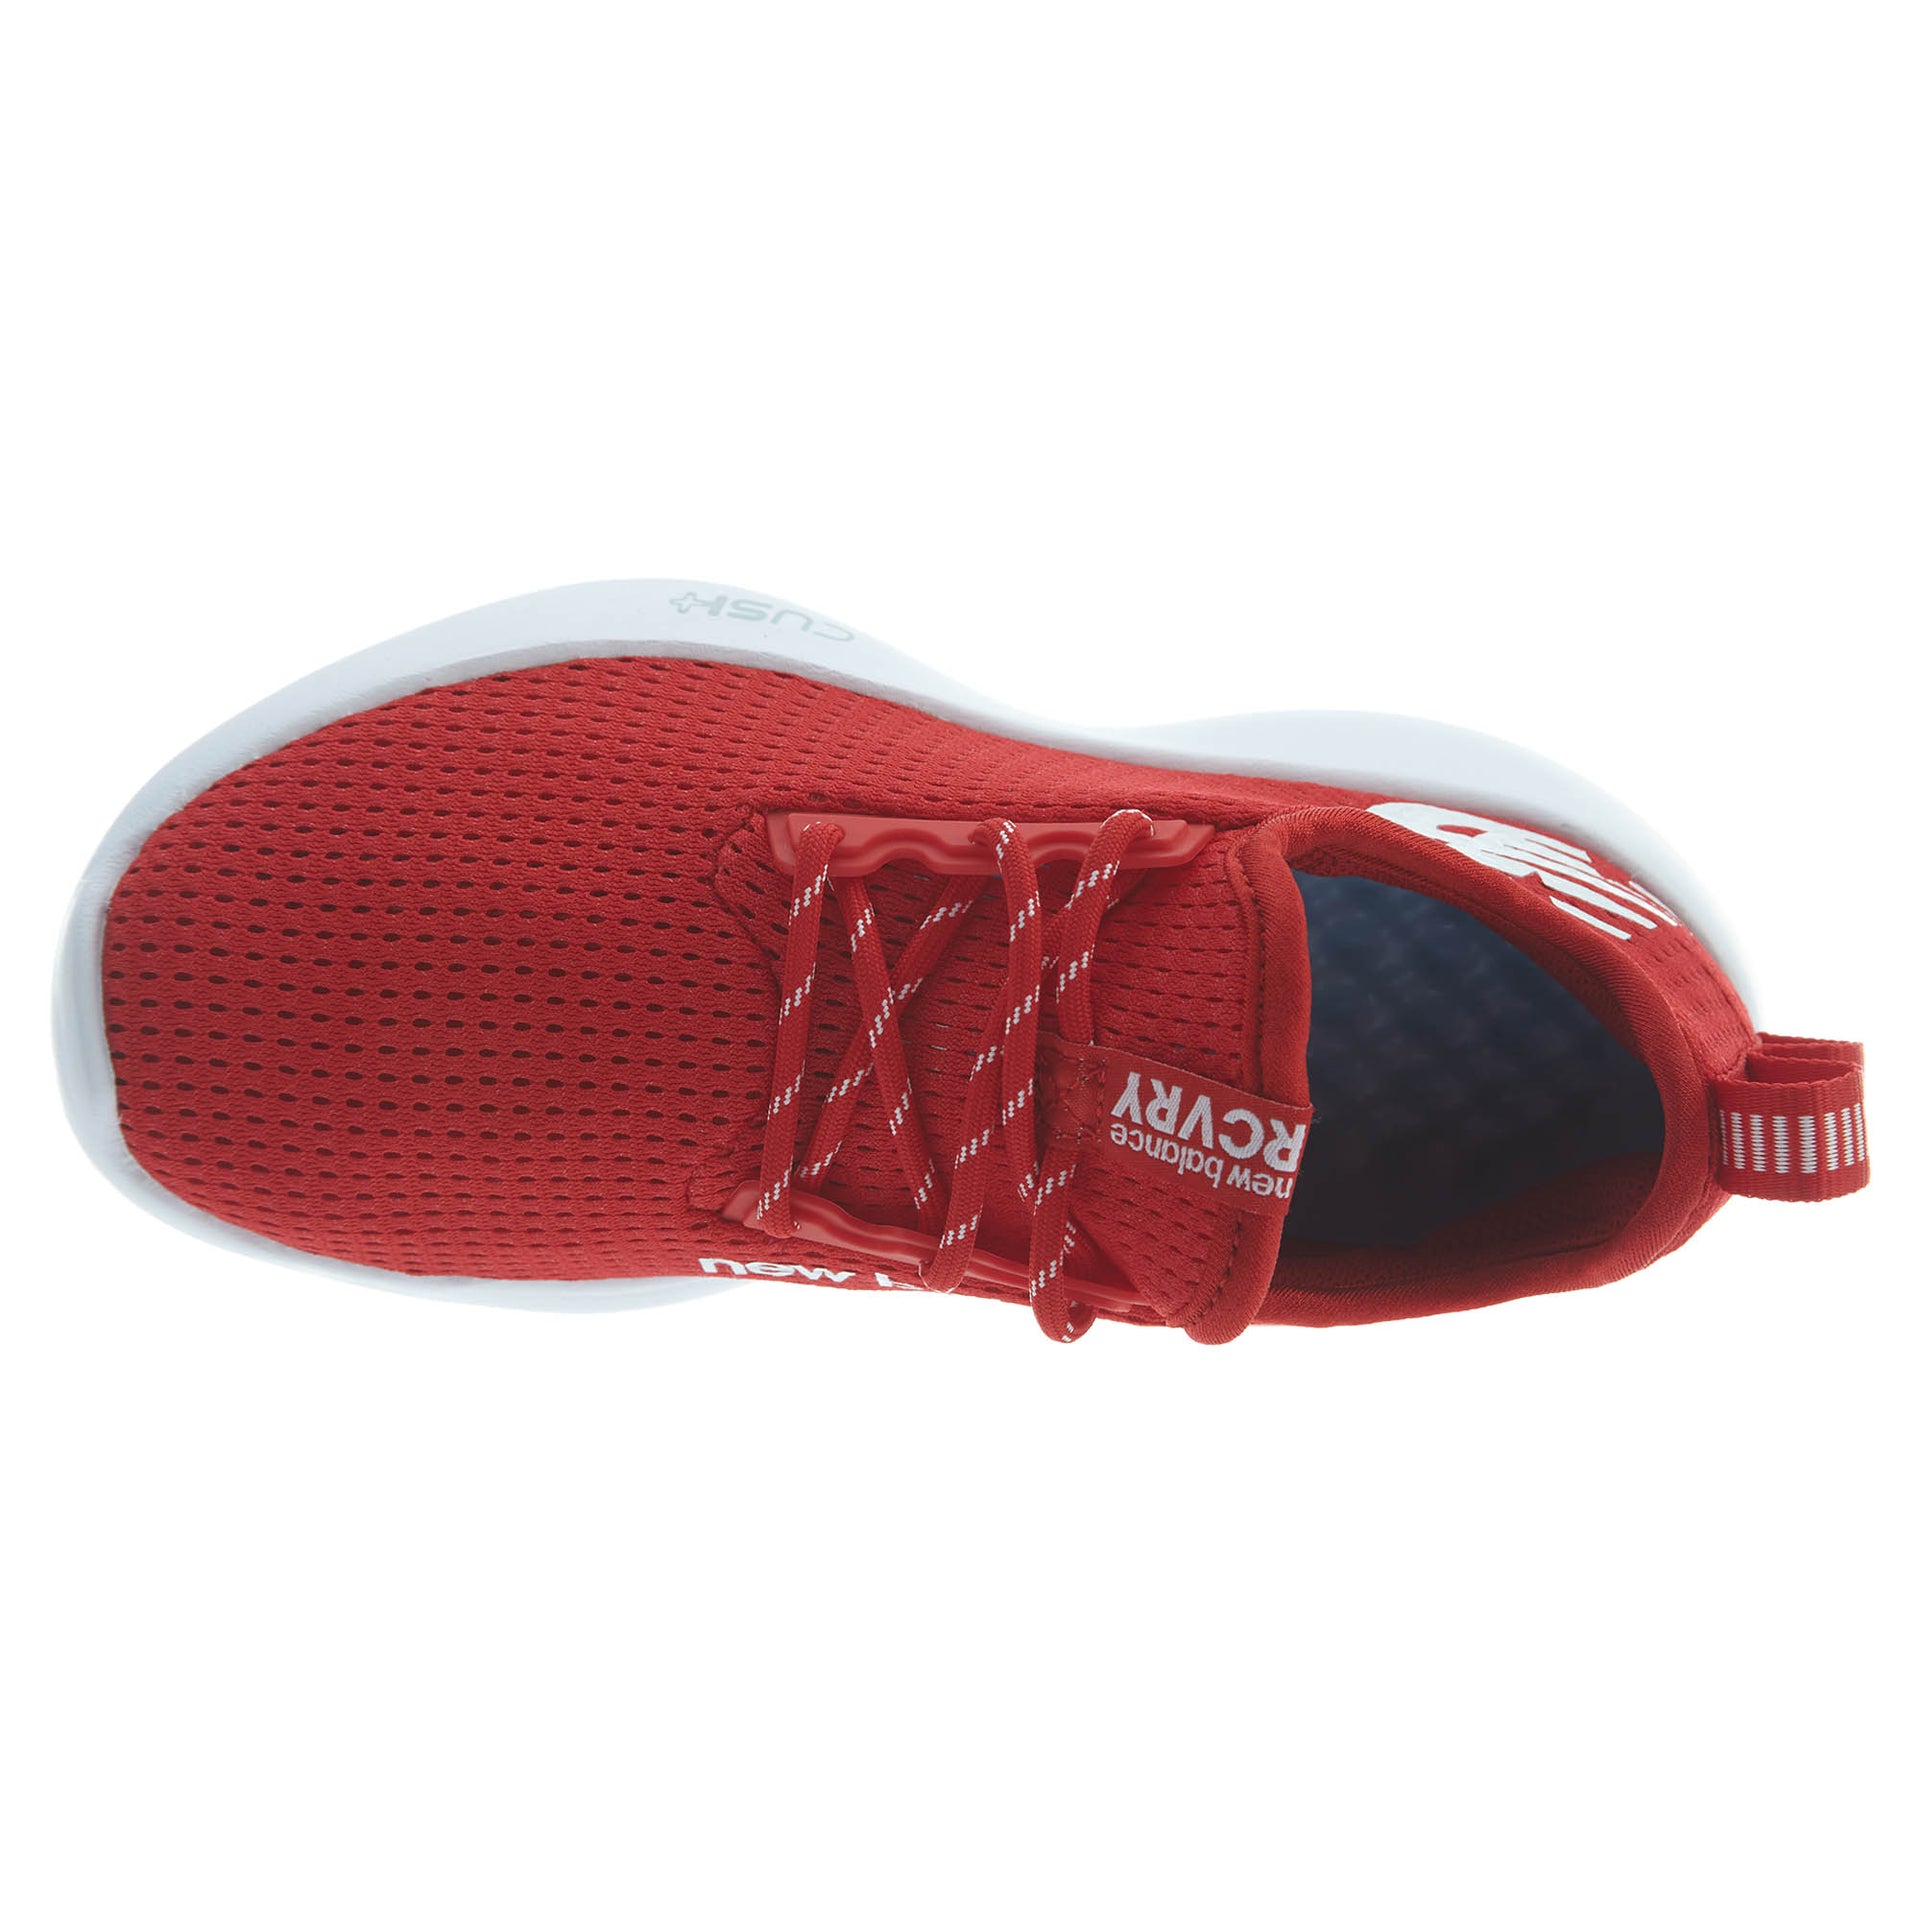 New Balance Recovery V1 Transition Lacrosse Mens Style : Rcvr-YRD